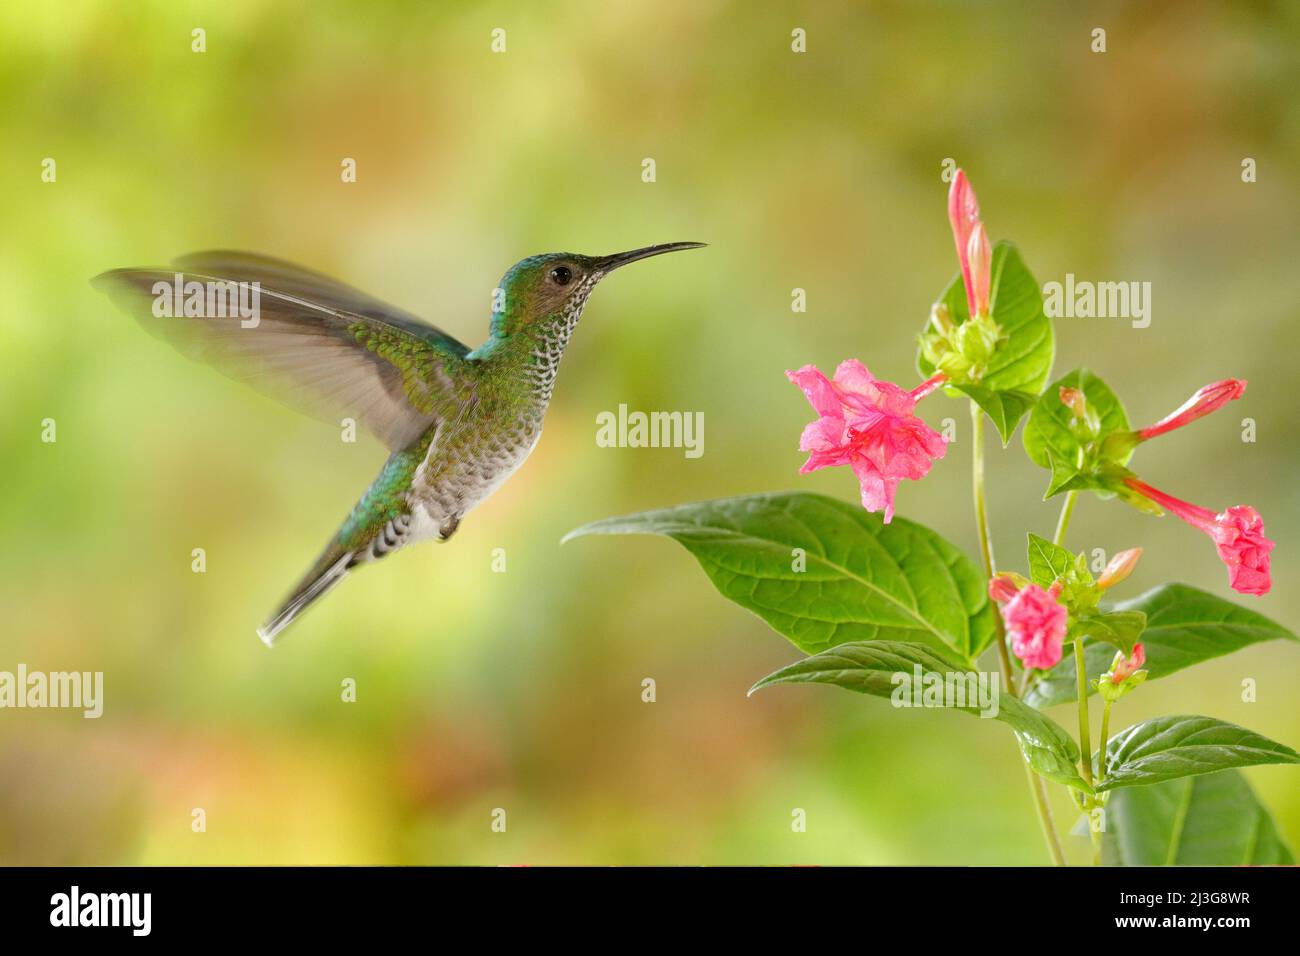 Birdwatching in South America. Flying hummingbird White-necked Jacobin (female) next pink red flower, Florisuga mellivora, from Rancho Naturalista, Co Stock Photo